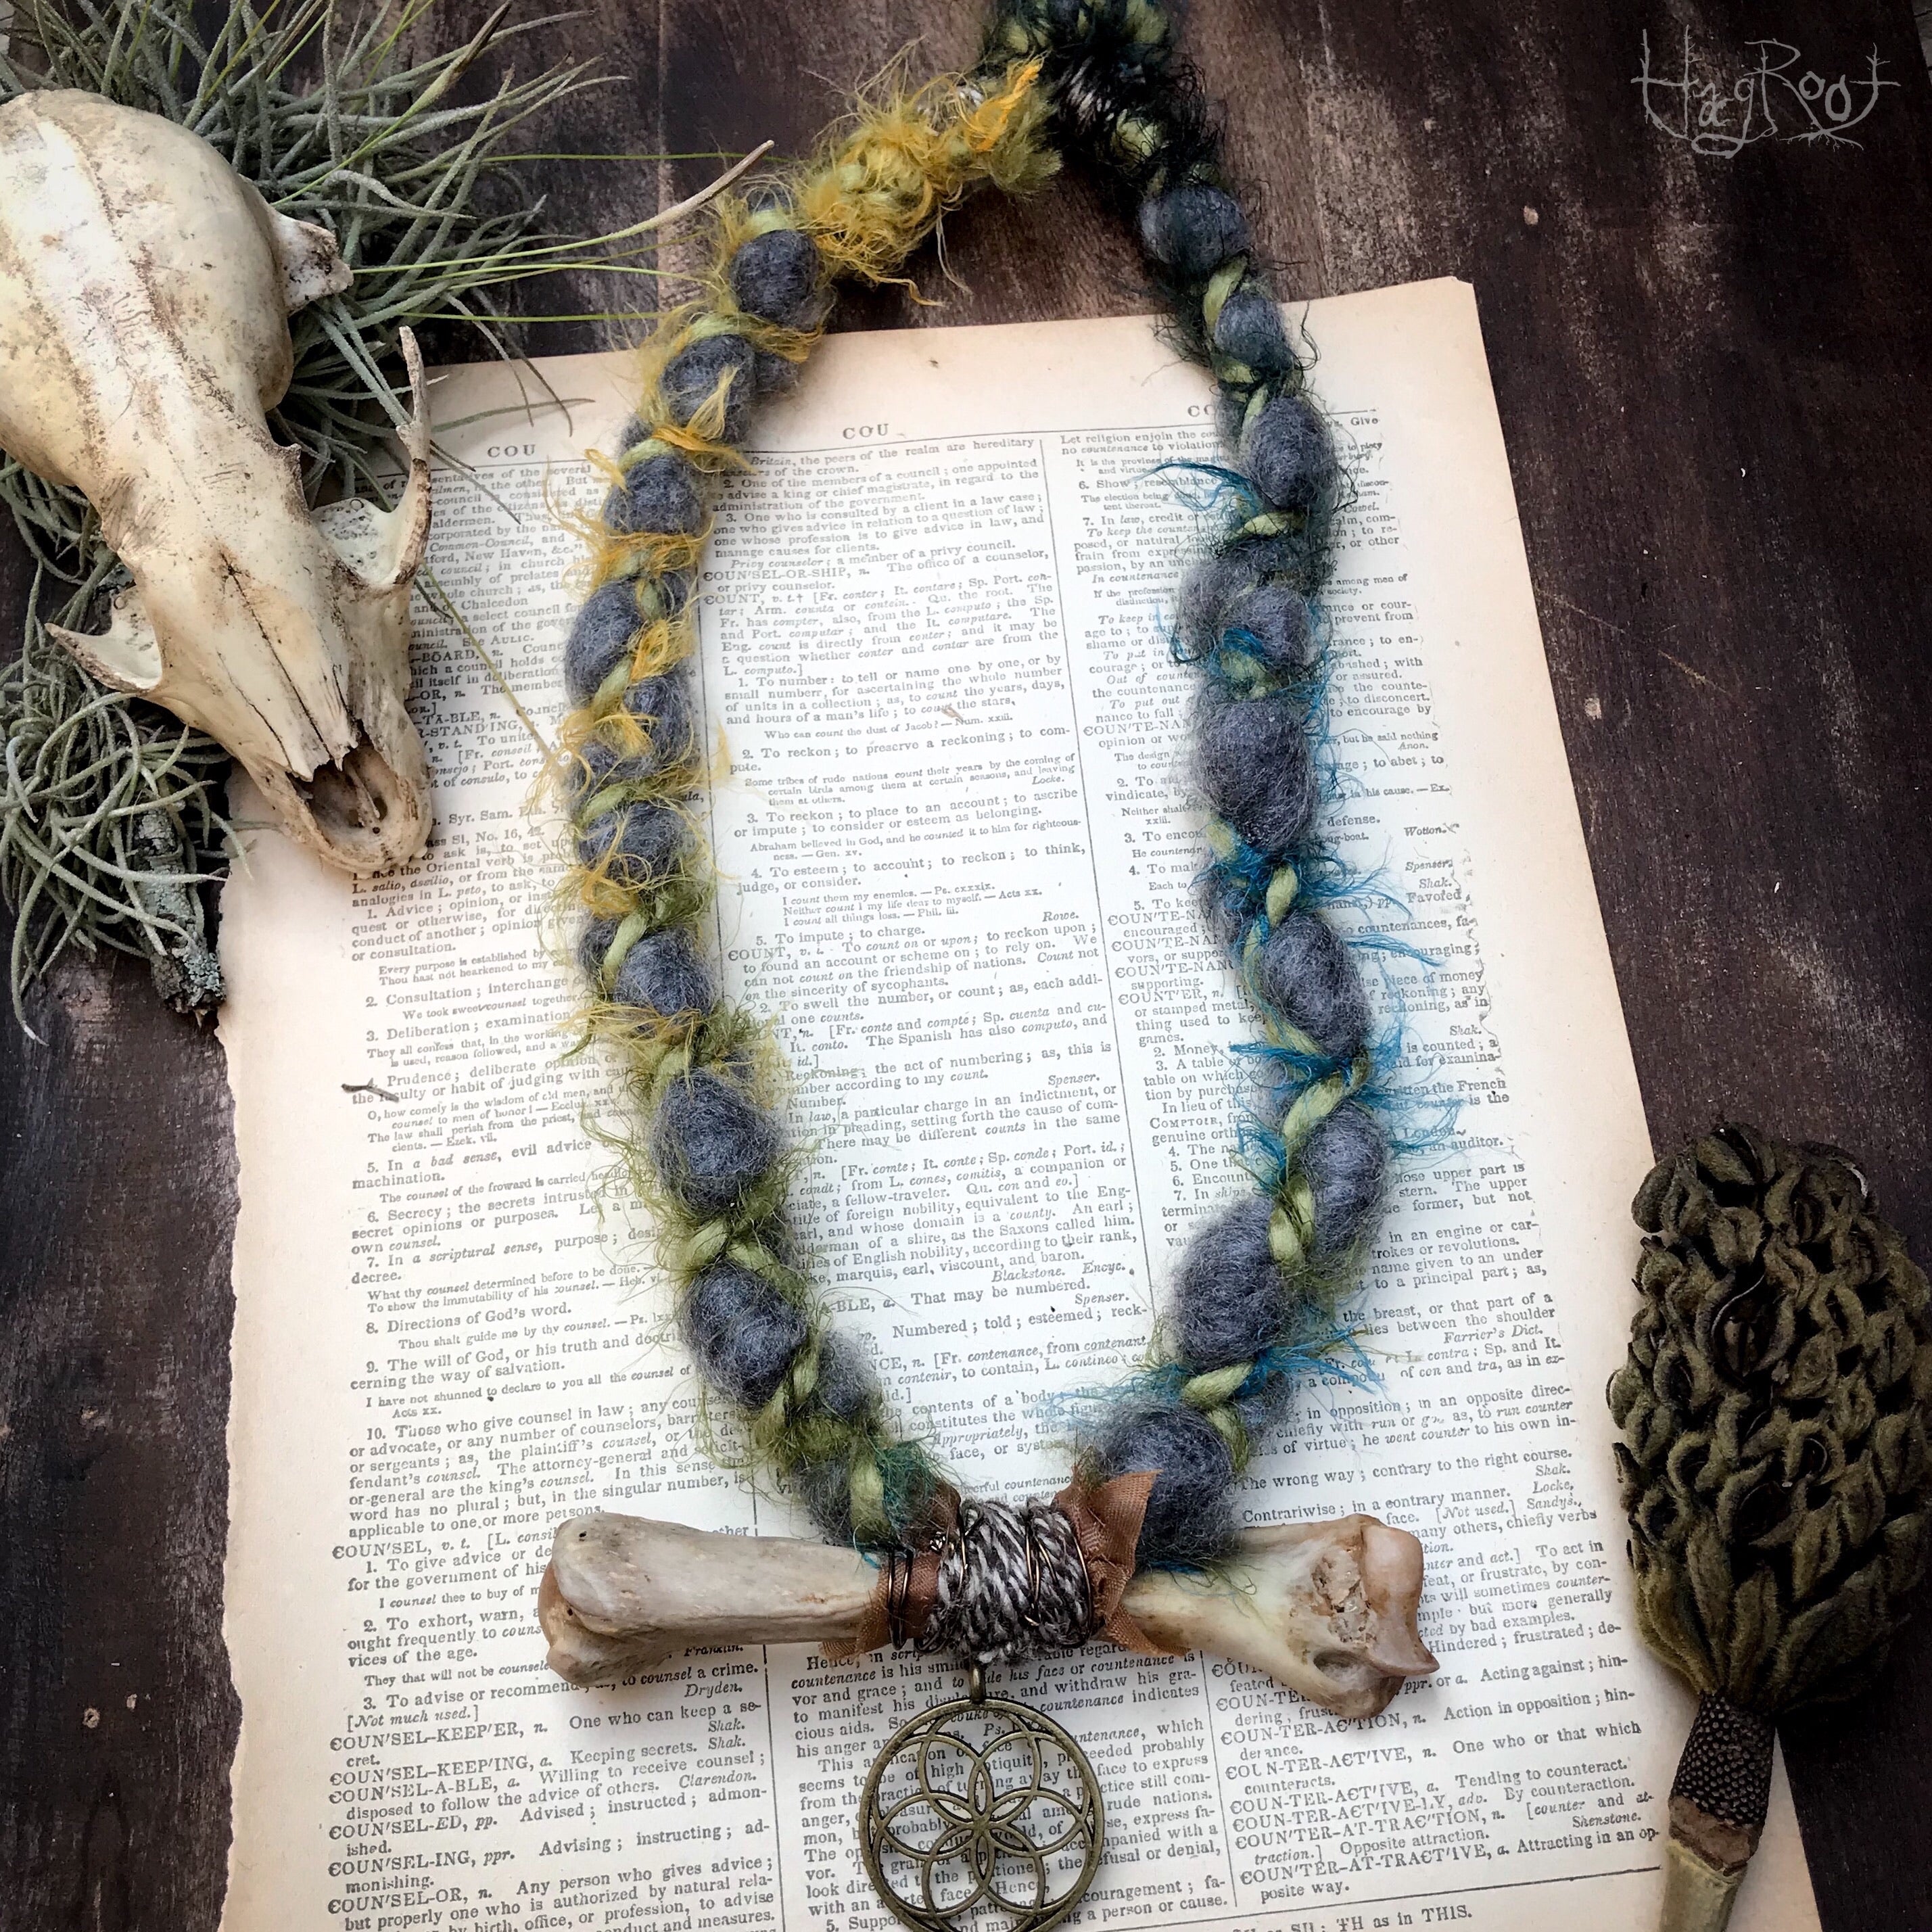 Shaman Weaver Necklace for Consciousness and Seeing the Hidden